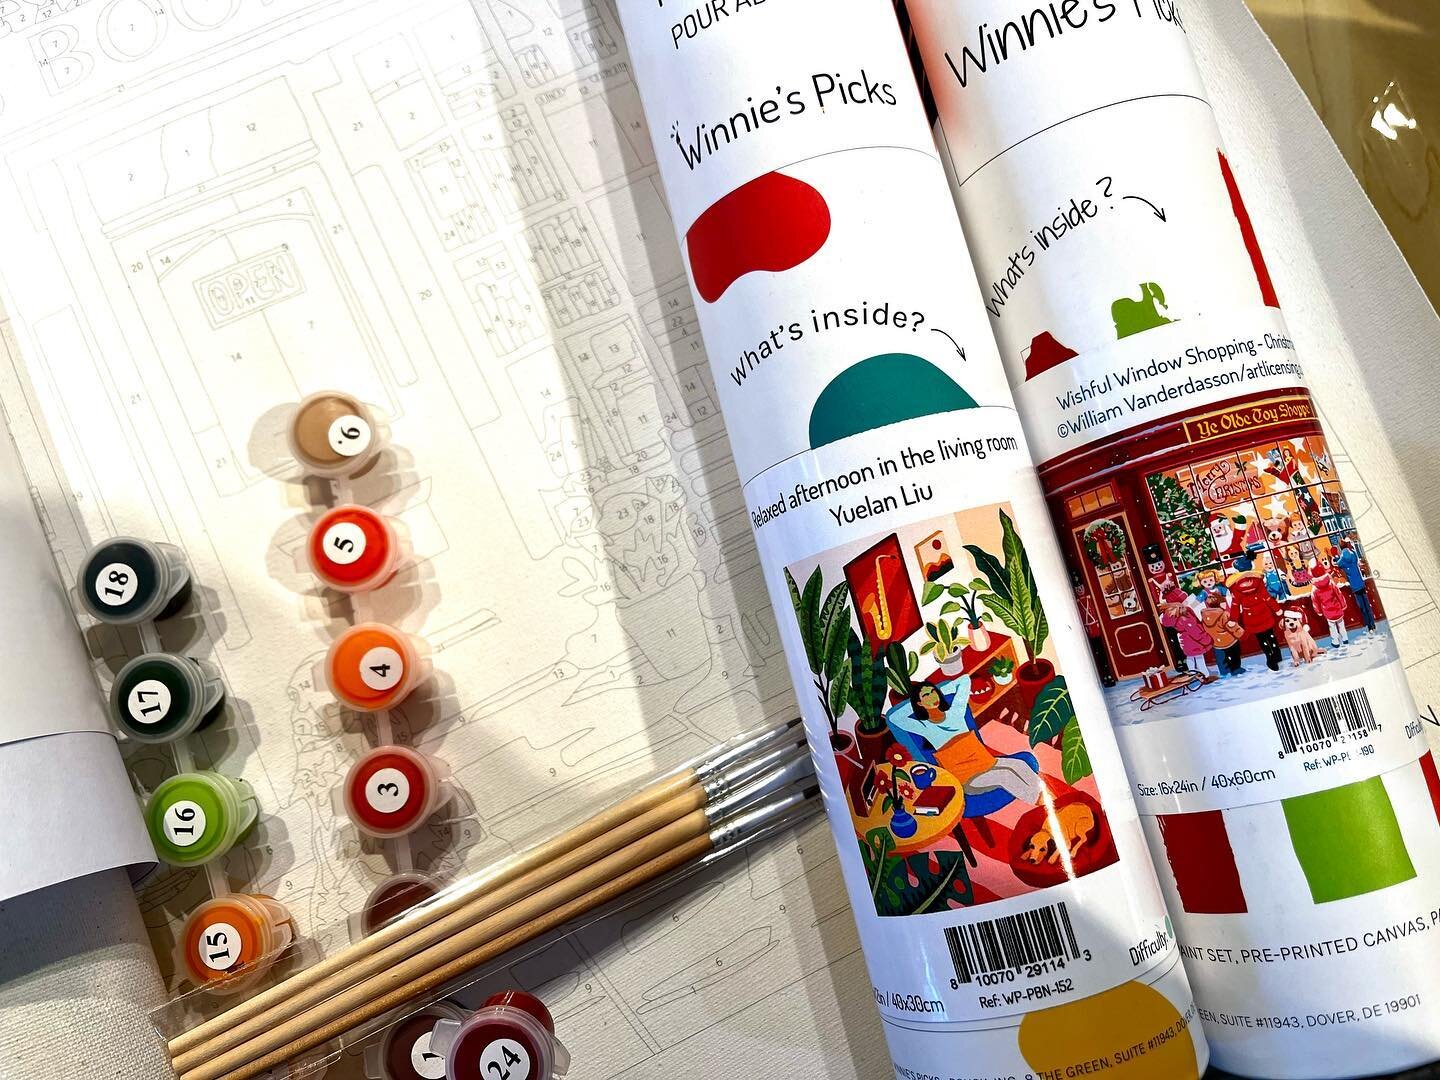 Paint by number kits. Great gift idea for any age!